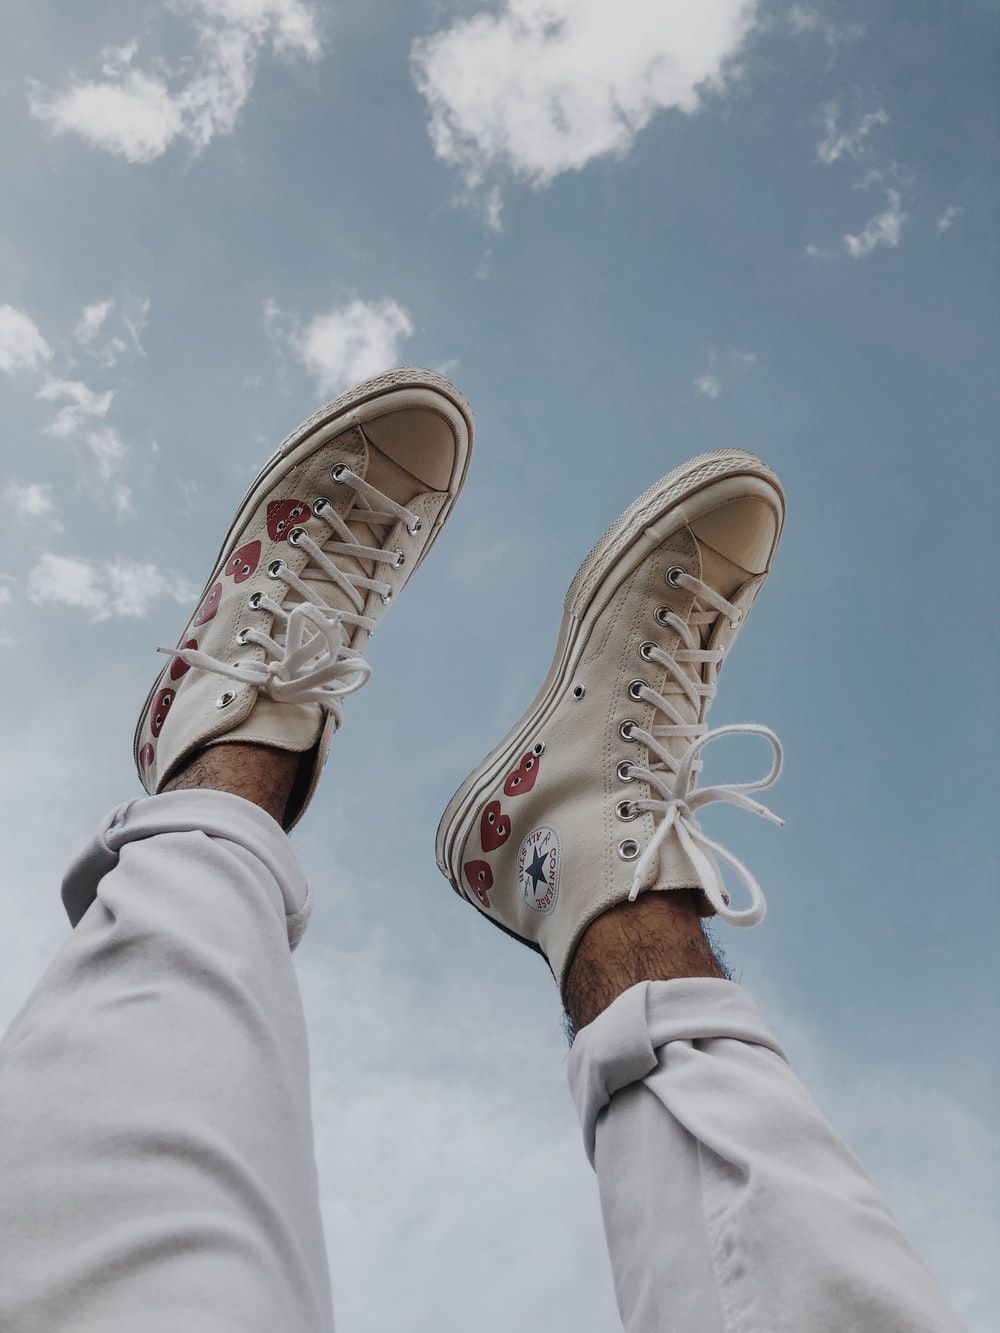 White Sneakers Picture. Download Free Image